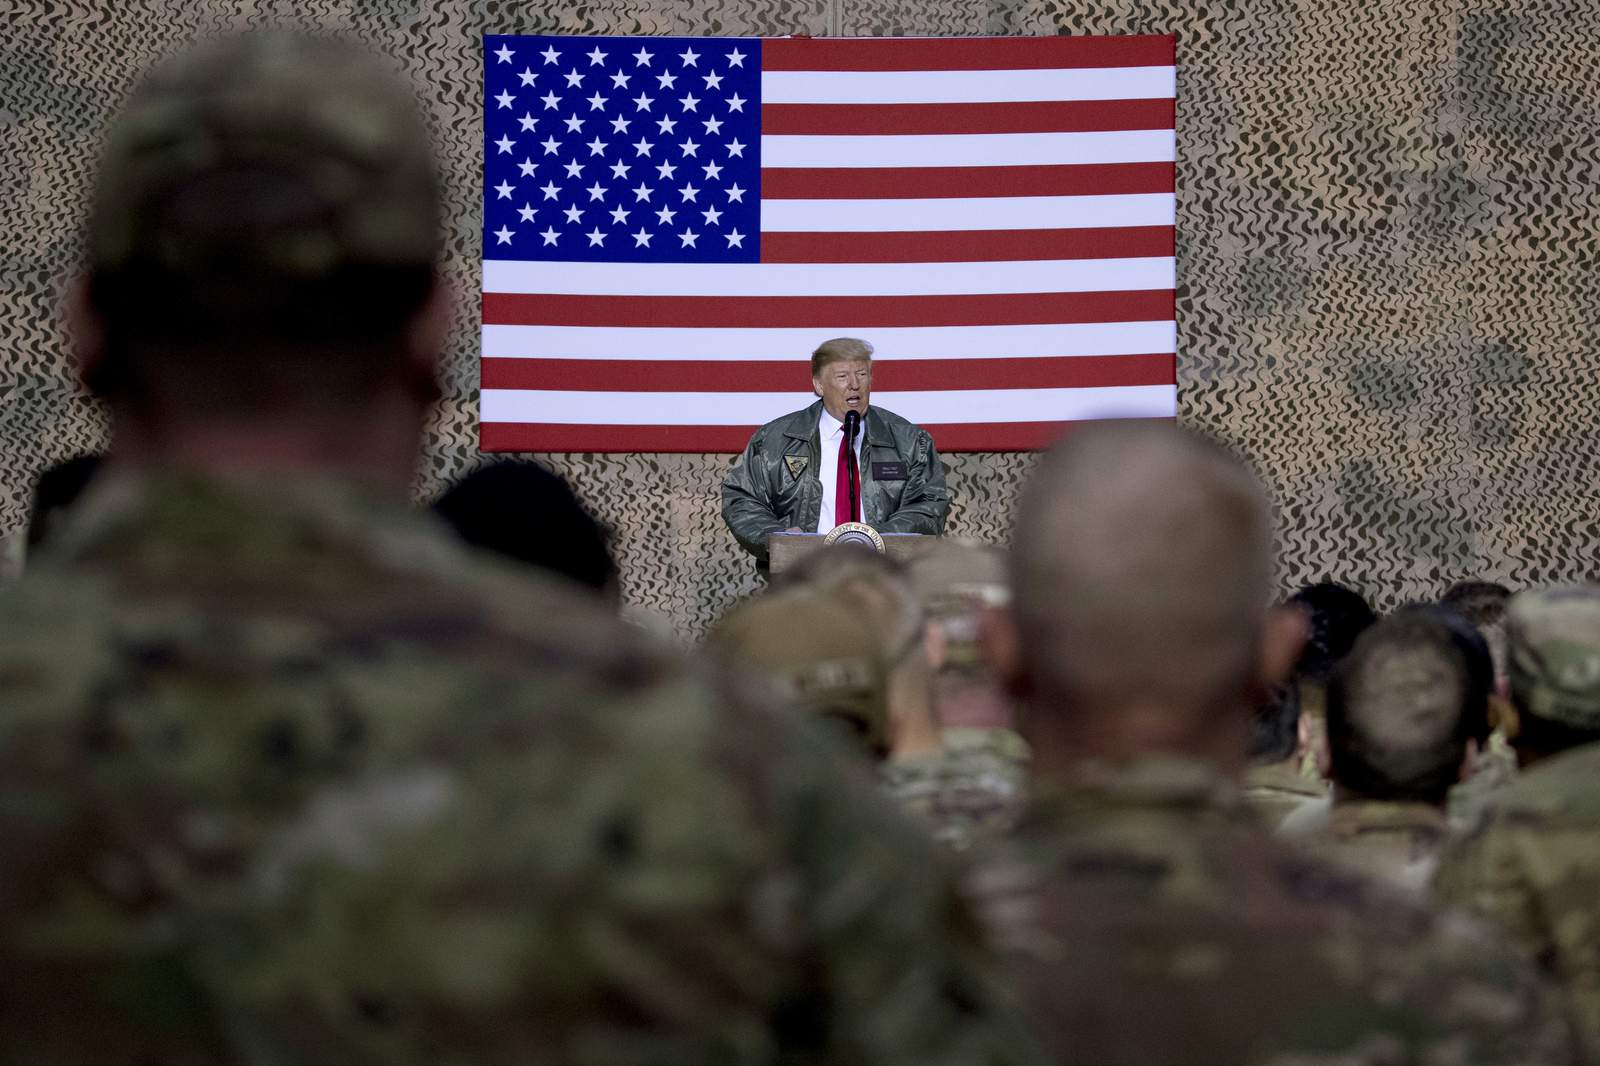 Veterans are divided about reports Trump disparaged military